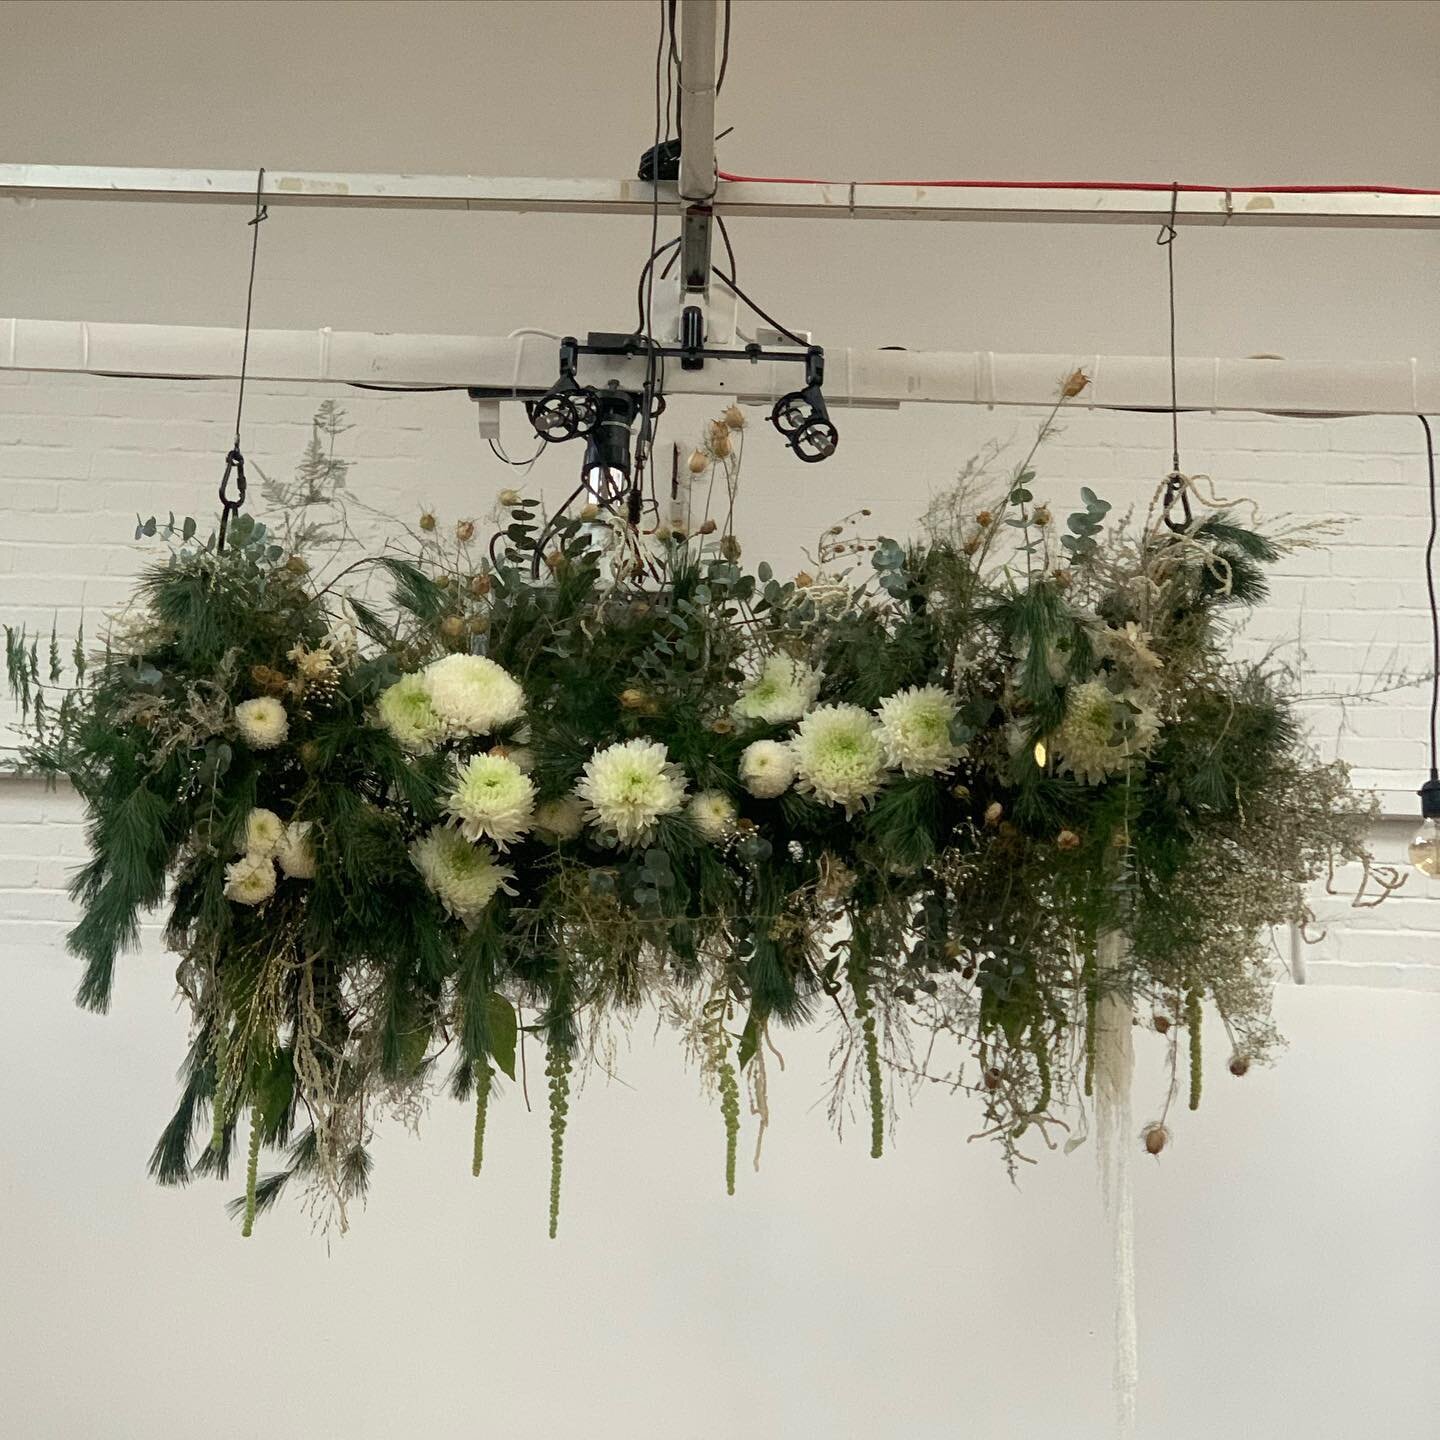 Last job of the year! Hanging arrangement for @christchurchlondon using a mixture of dried and fresh blooms in green, white and woody tones ❄️❄️❄️